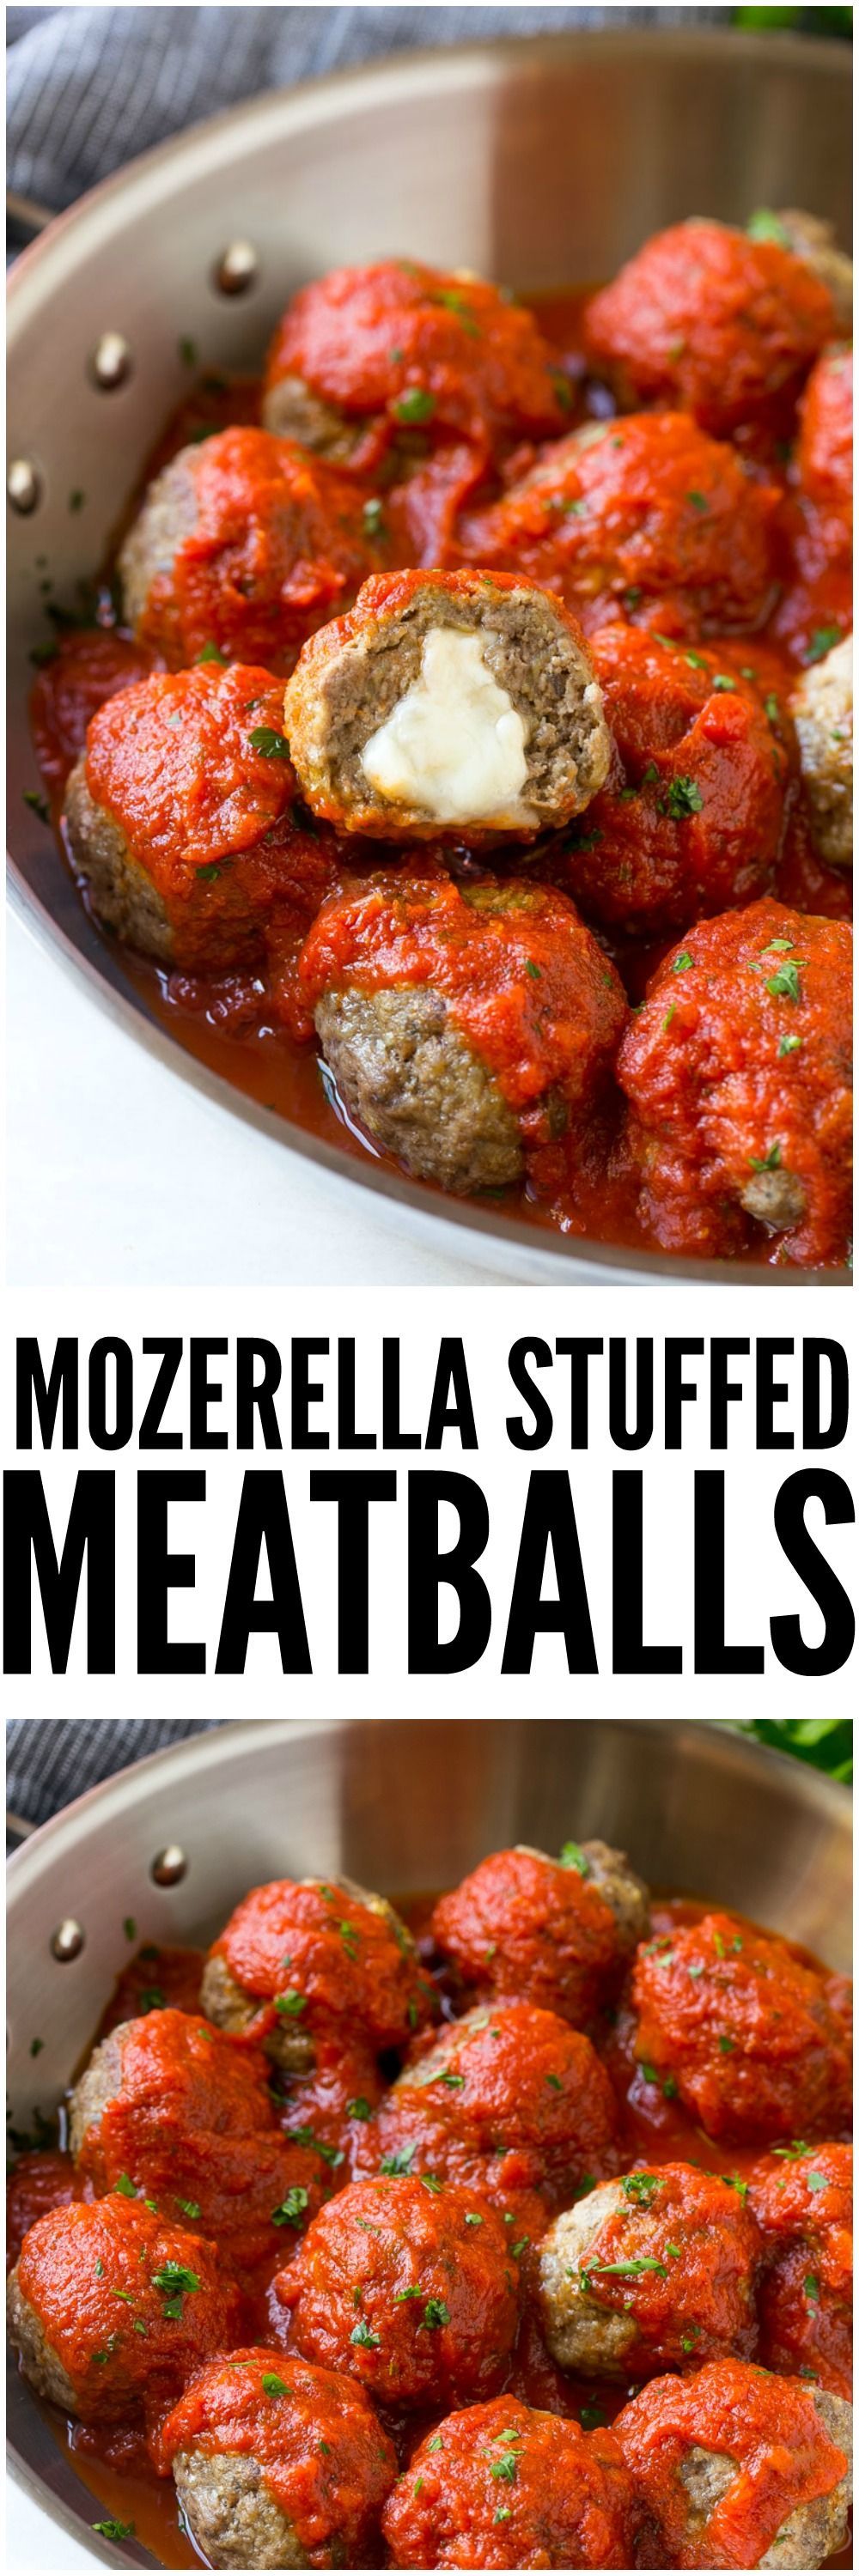 Mozzarella Stuffed Meatballs are a fun twist on the classic recipe - serve these meatballs as a party appetizer or over a big plate of spaghetti for a hearty meal! -   21 keto recipes meatballs
 ideas